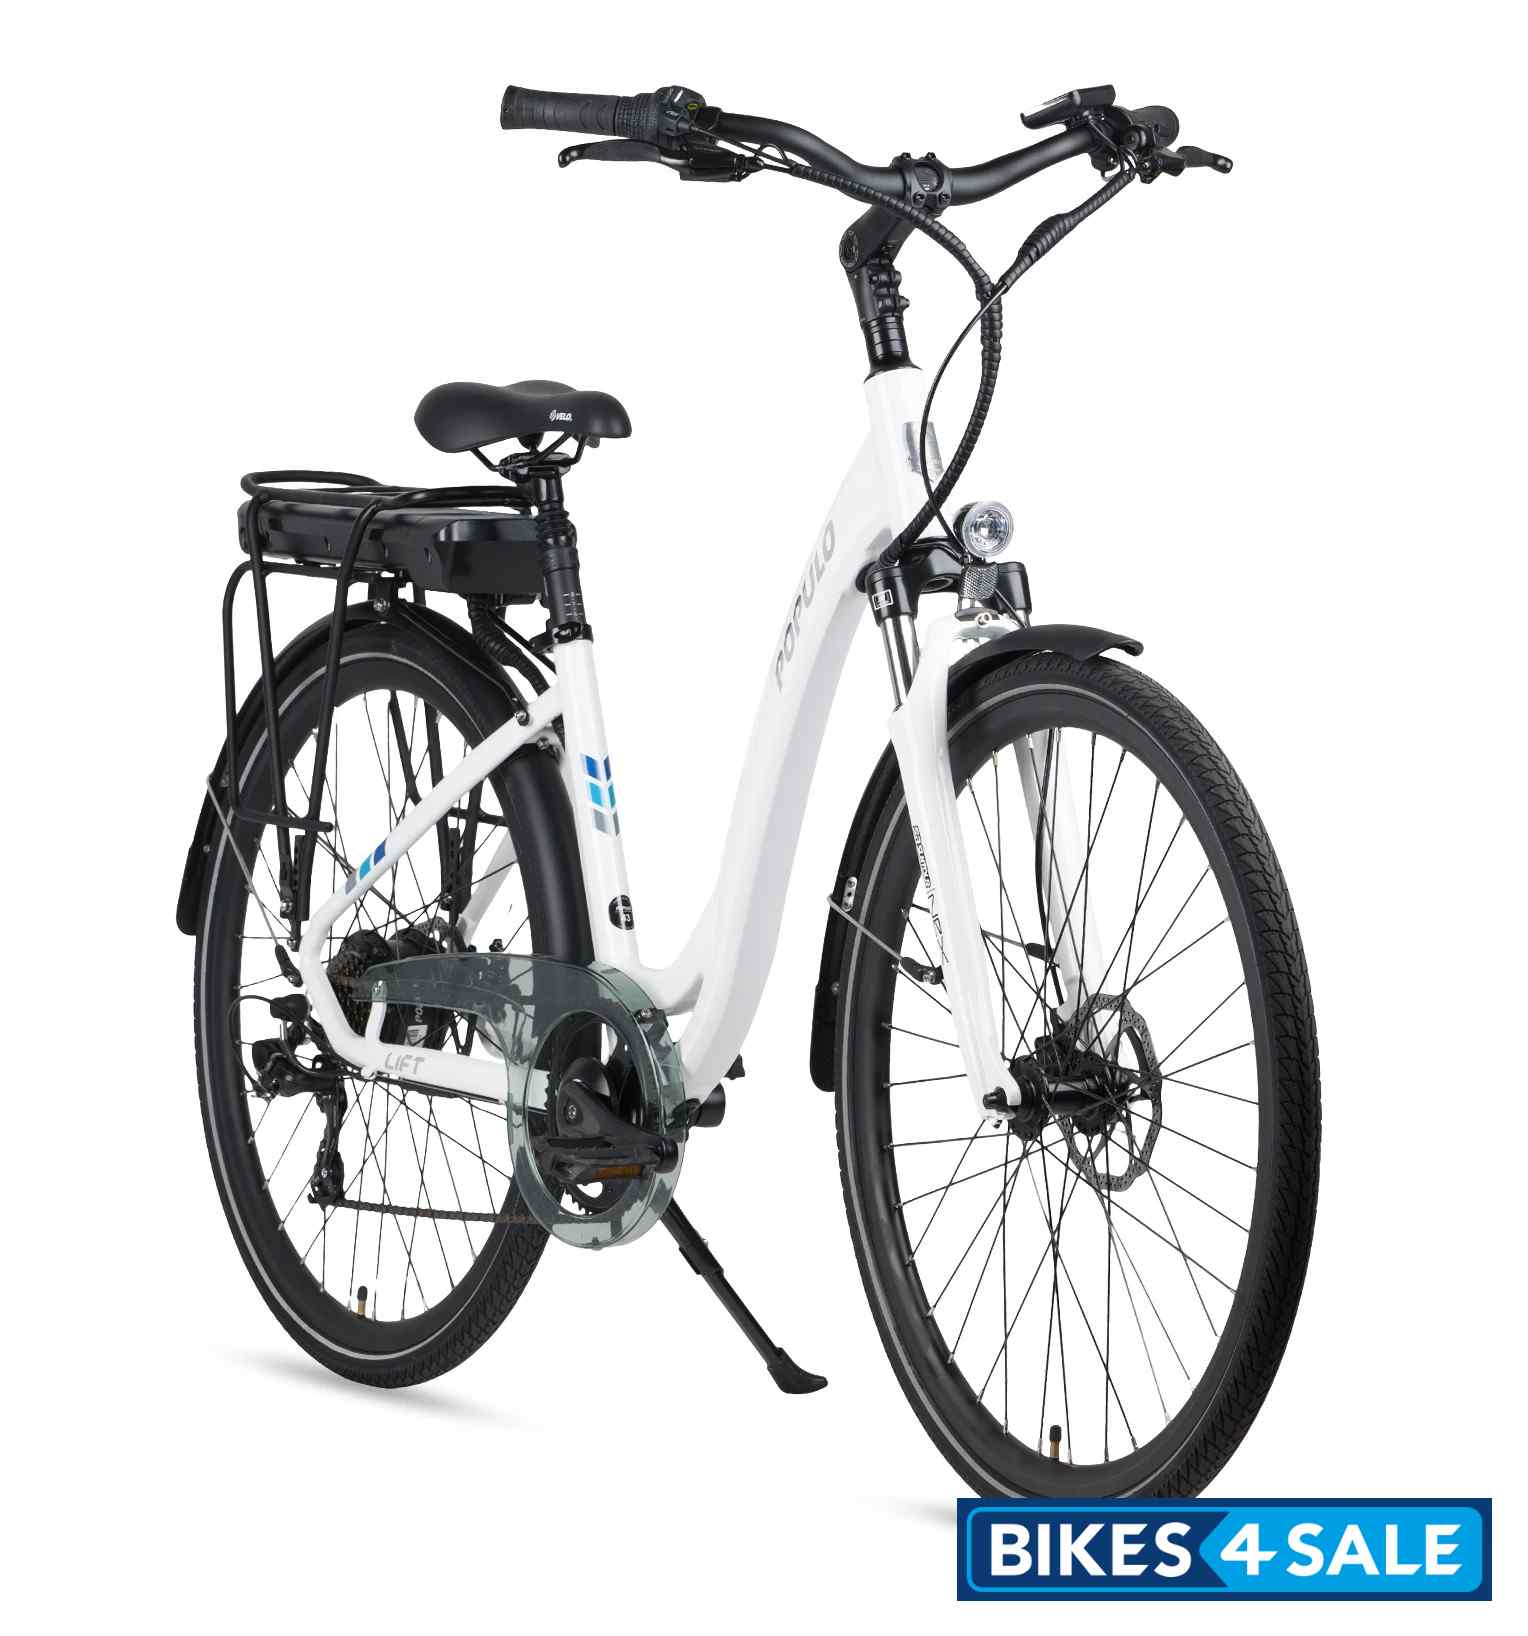 Populo Lift V2 Electric Bicycle